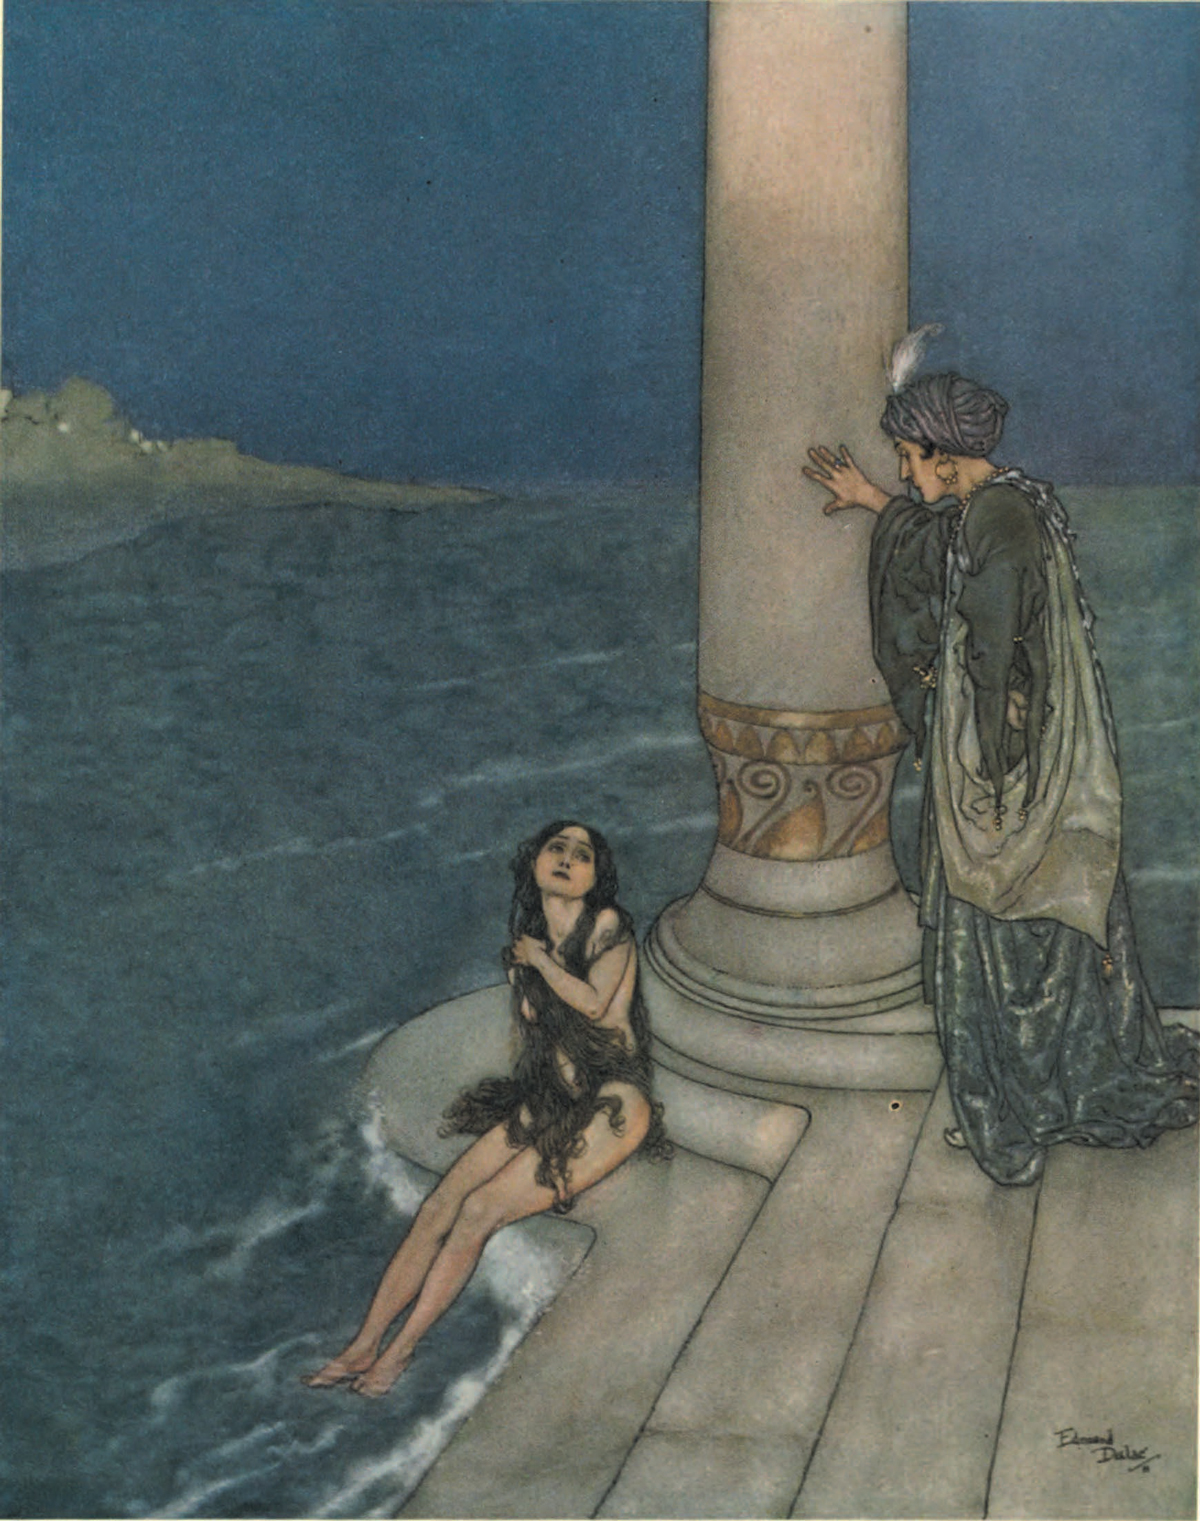 The Little Mermaid illustration by Edmund Dulac